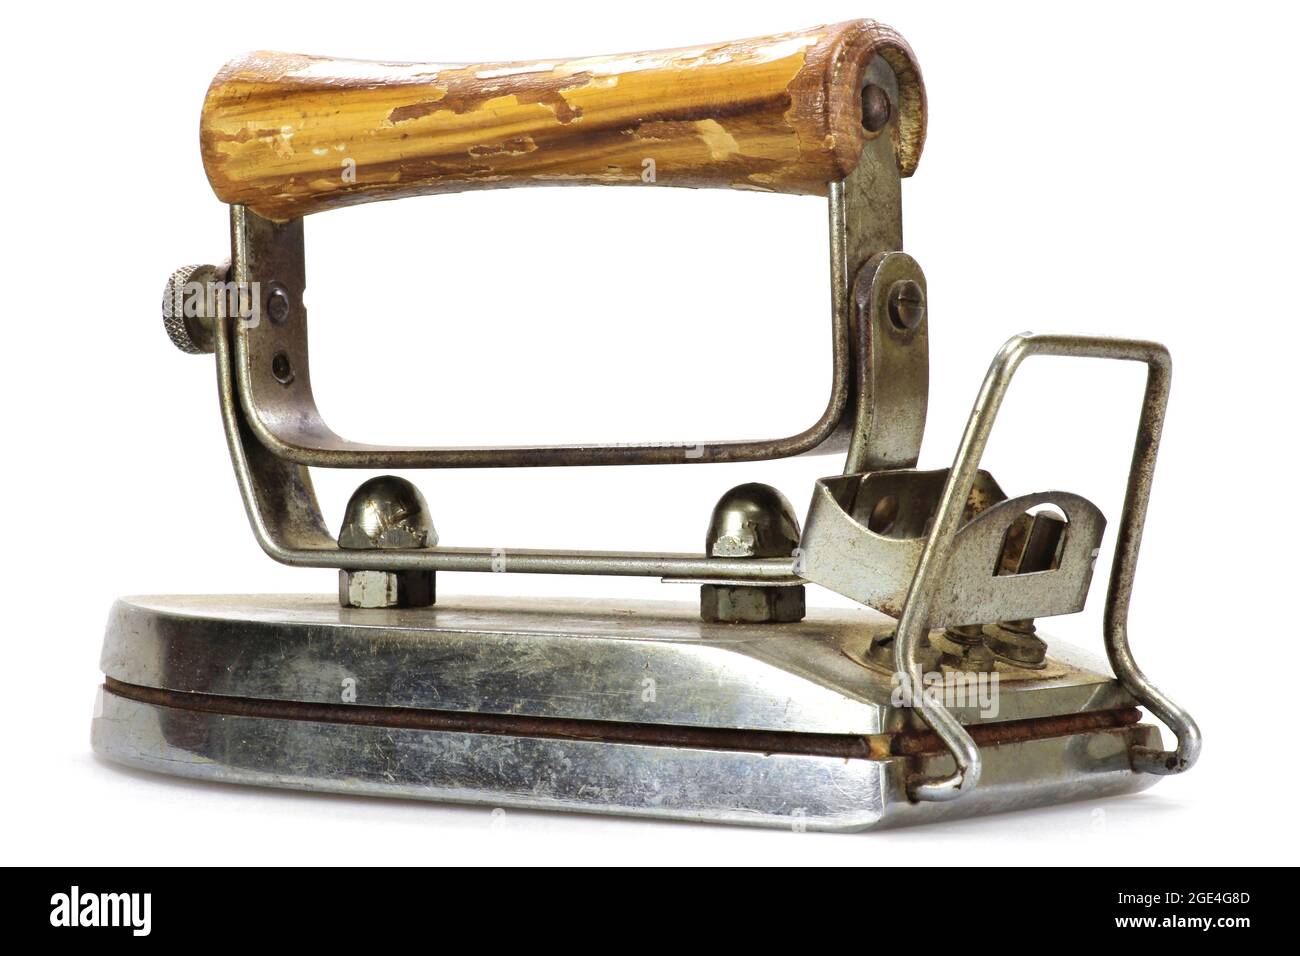 Who Invented the Electric Flat Iron?